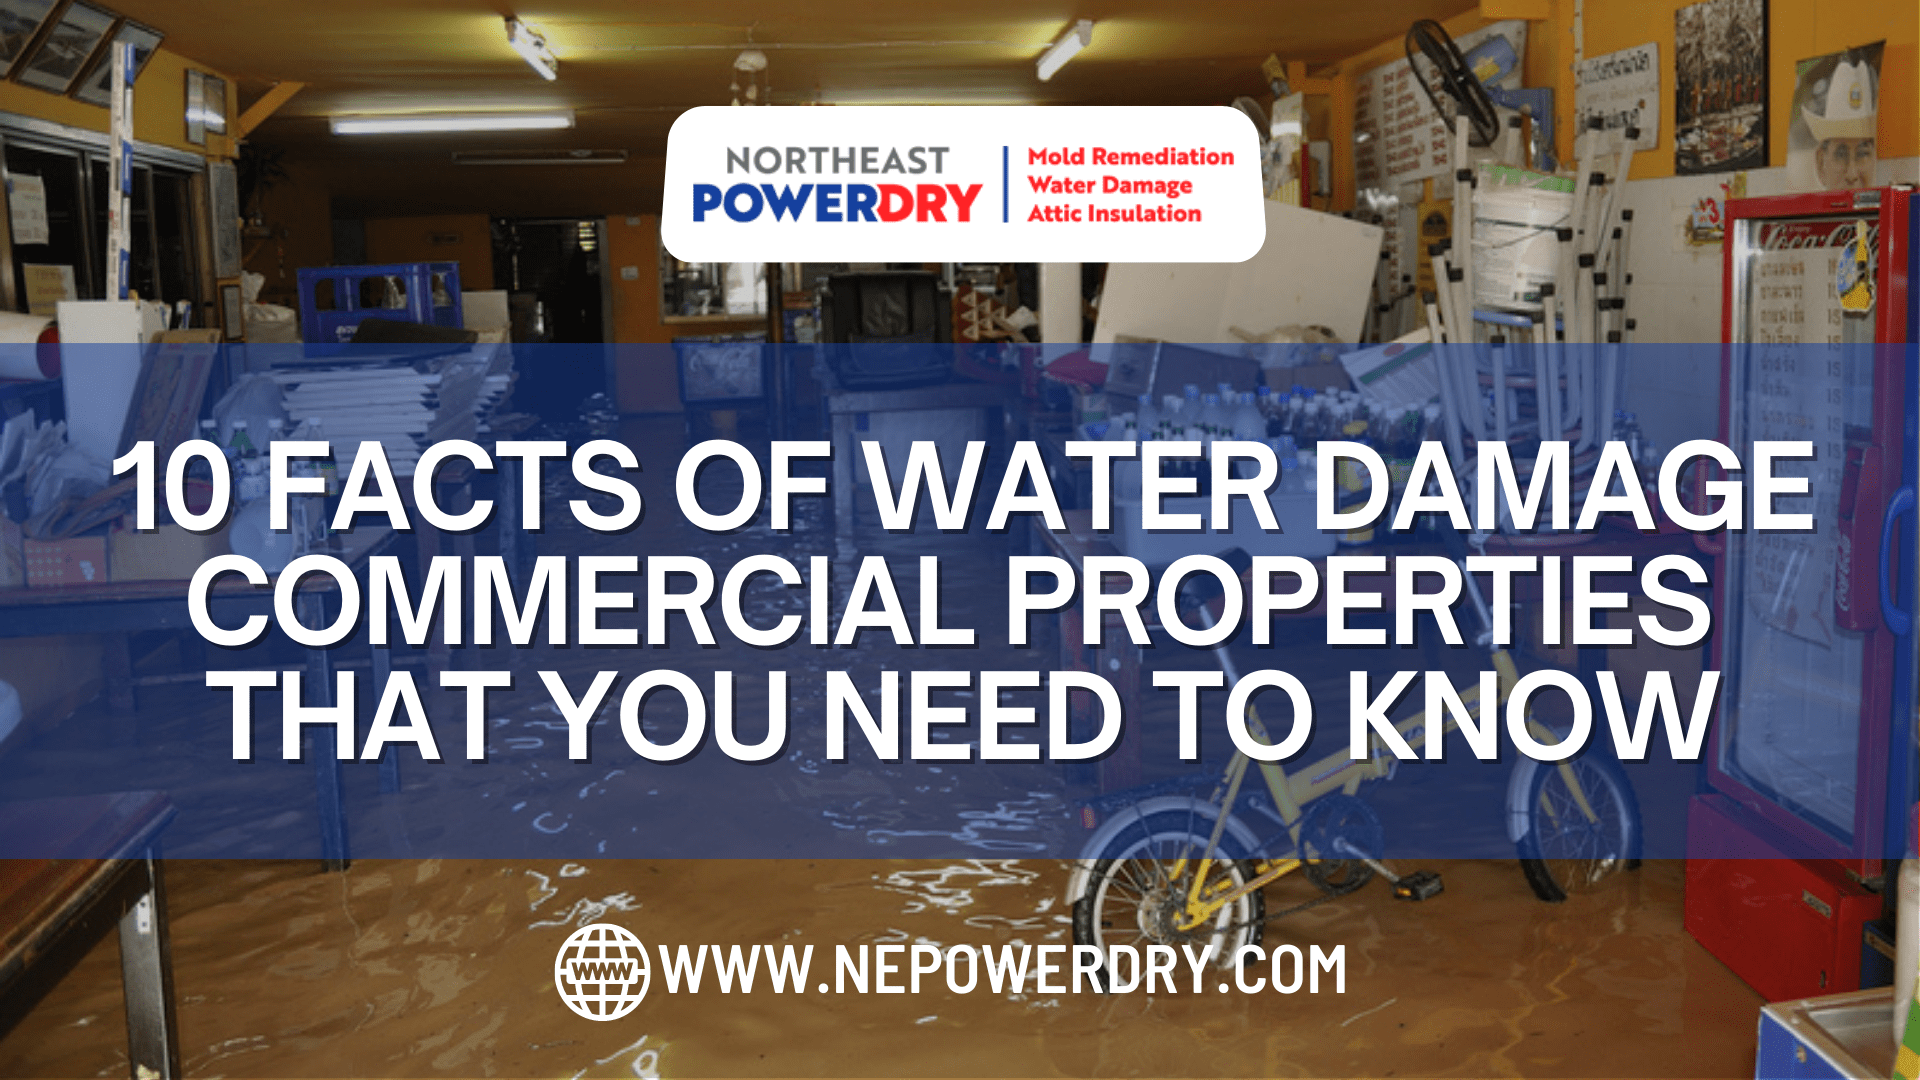 10 Facts of Water Damage Commercial Properties That You Need To Know